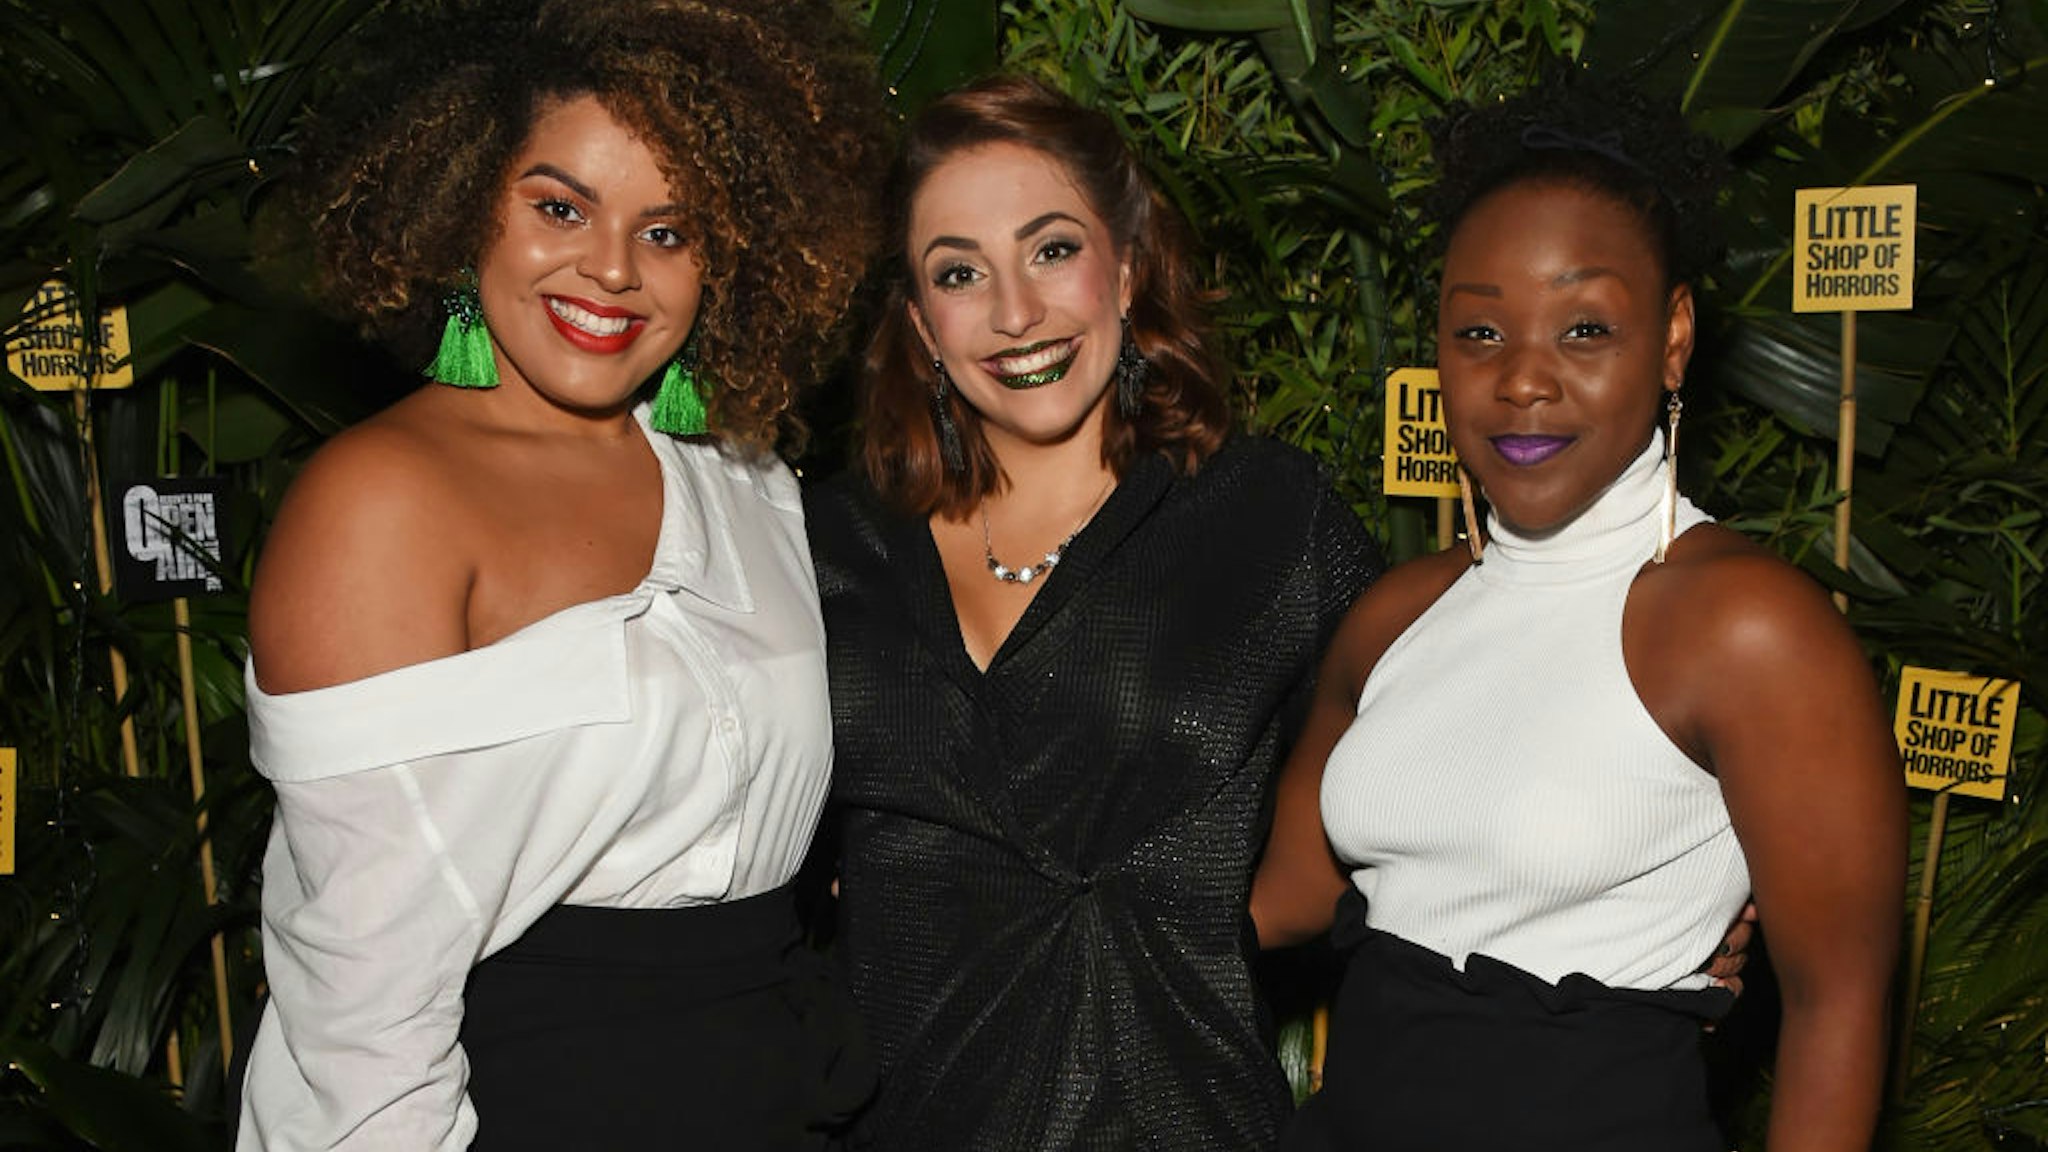 (L to R) Cast members Renee Lamb, Christina Modestou and Seyi Omooba attend the press night after party for "Little Shop Of Horrors" at Regent's Park Open Air Theatre on August 10, 2018 in London, England.